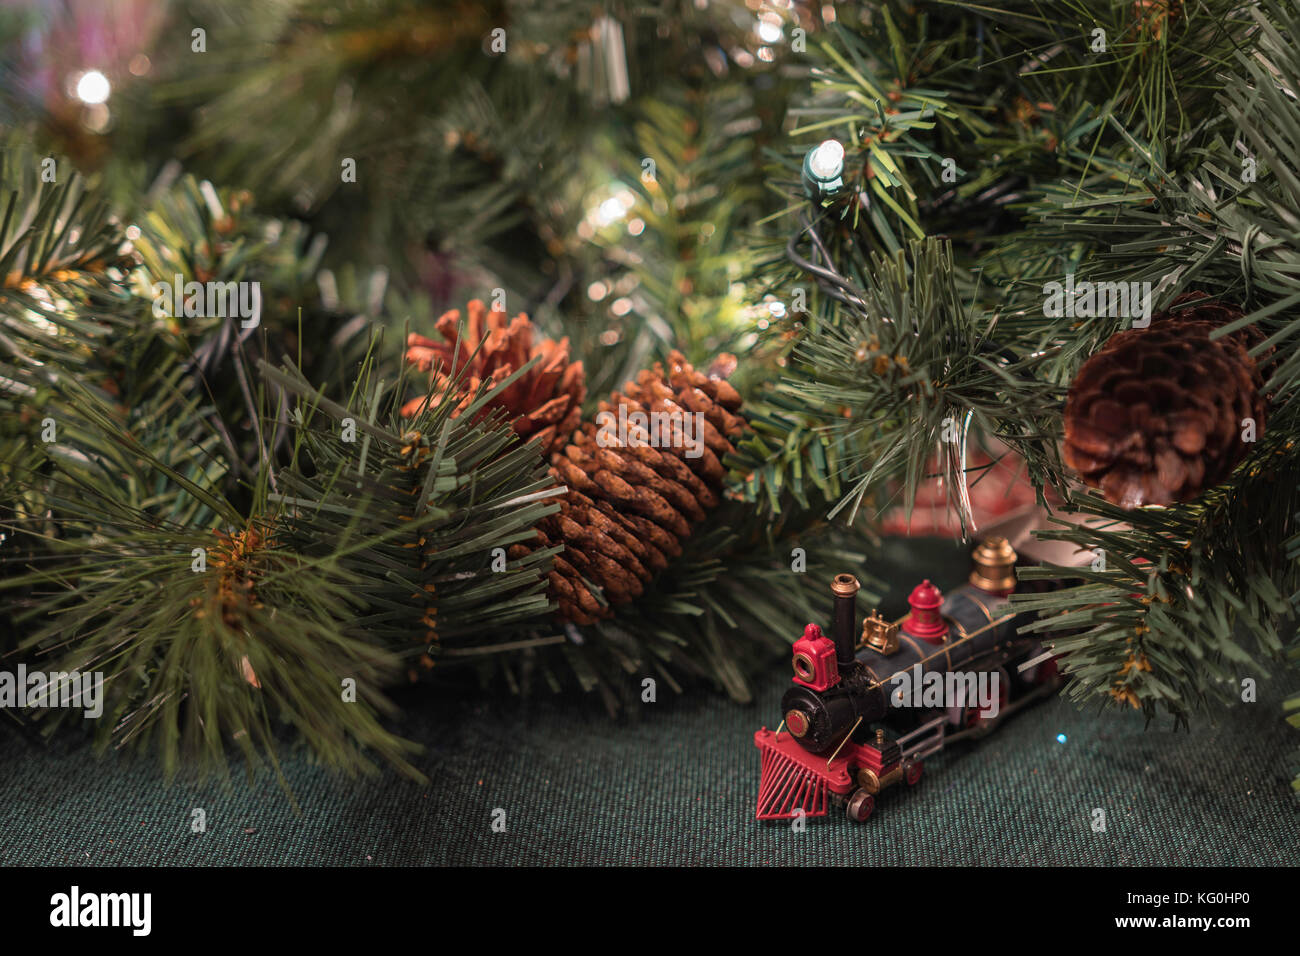 Christmas display with a small toy train surrounded by greenery and pine cones with white twinkle lights Stock Photo